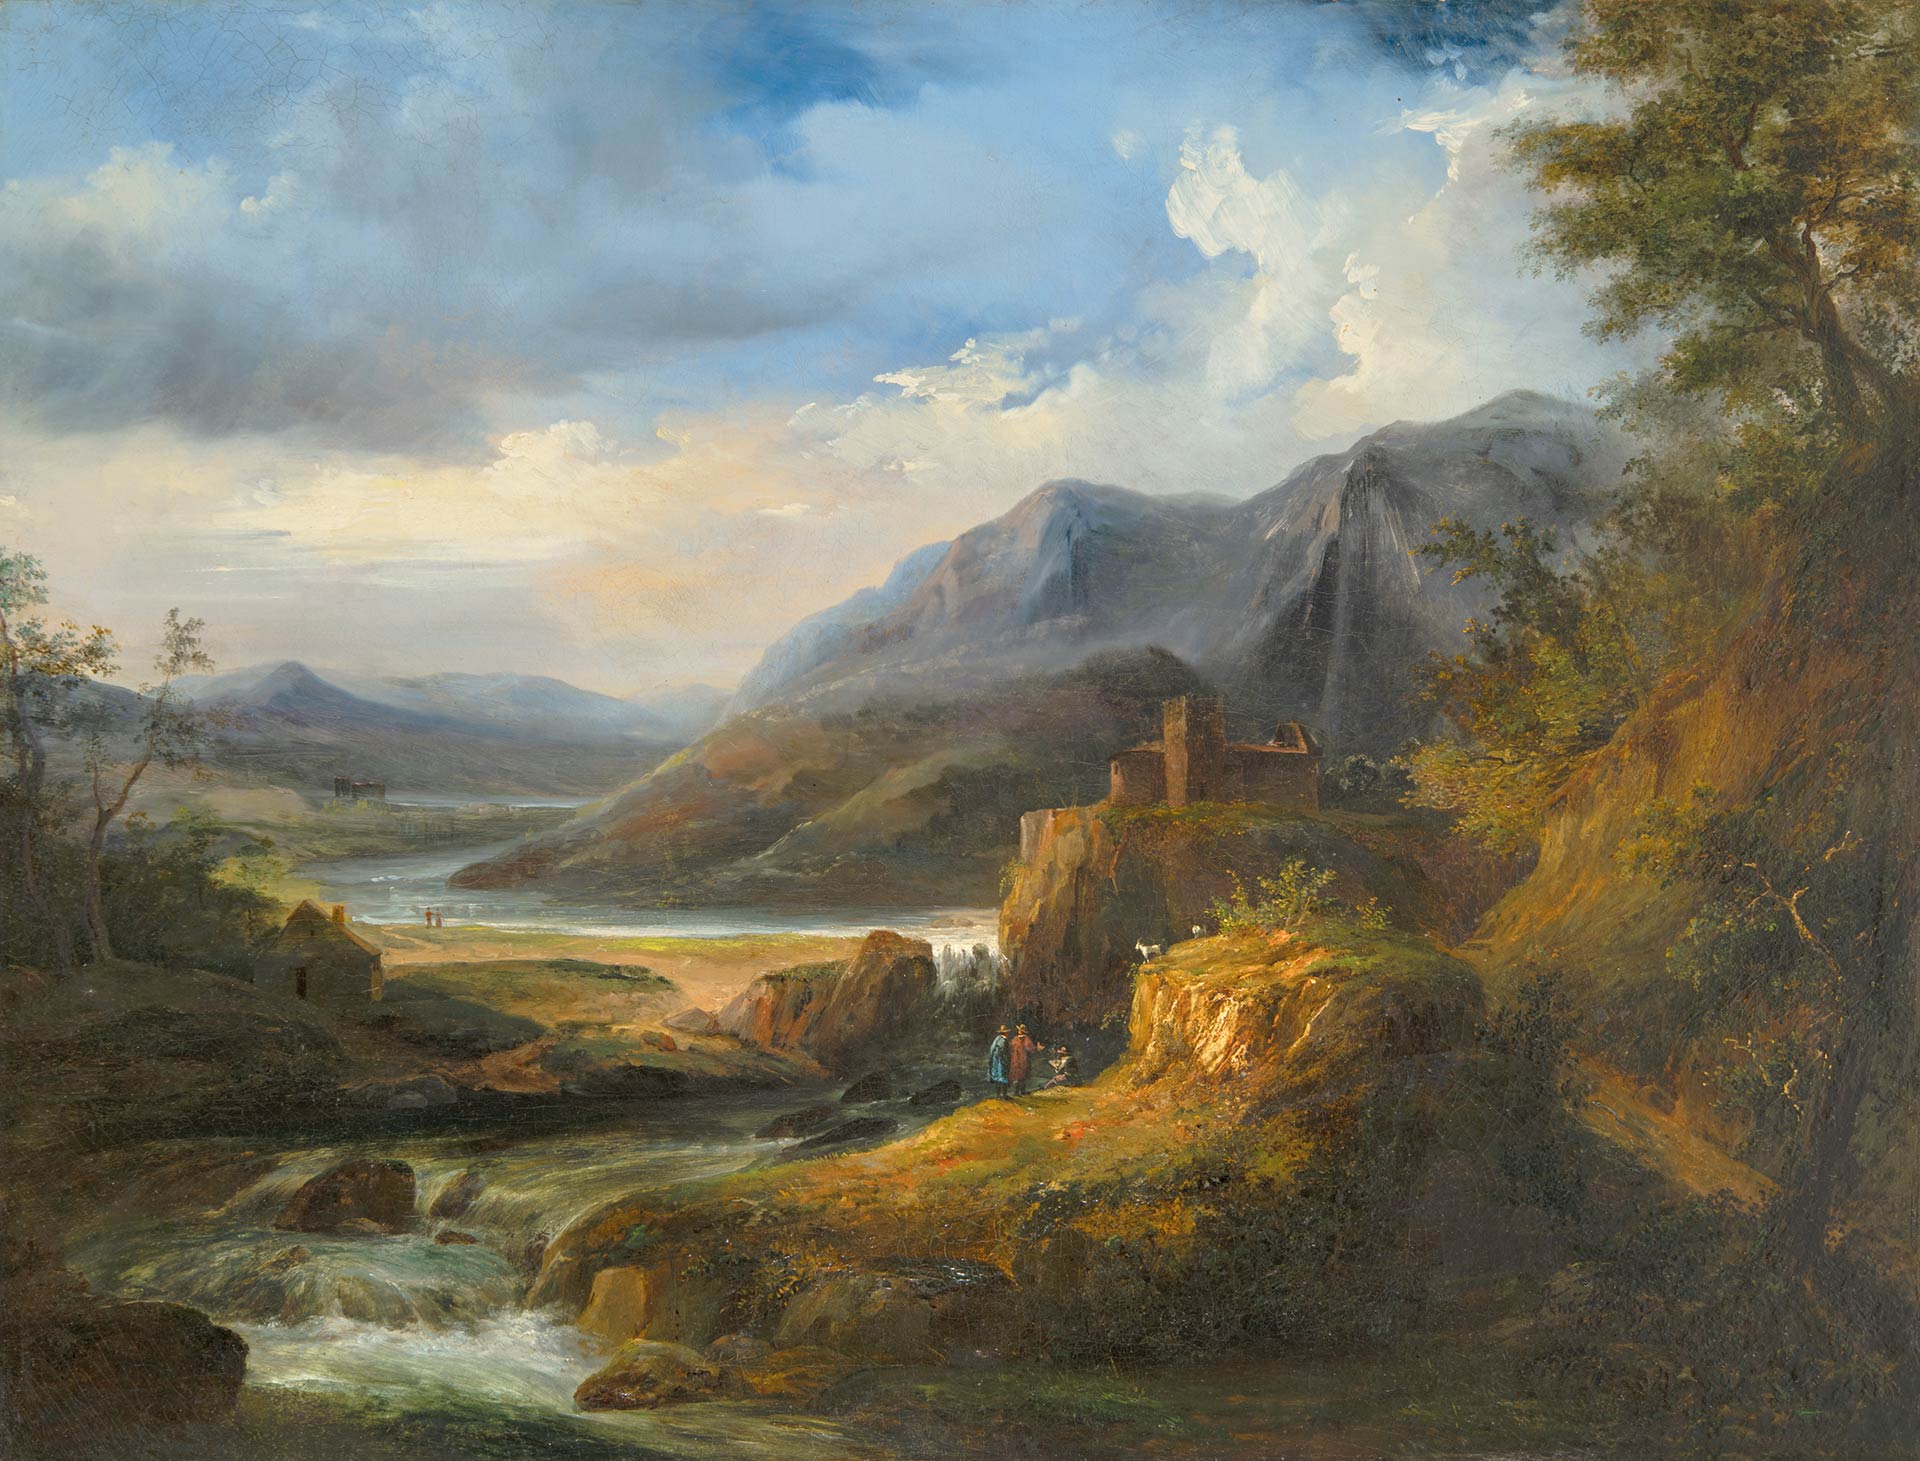 Markó András (1824-1895) In the Valley, 1868